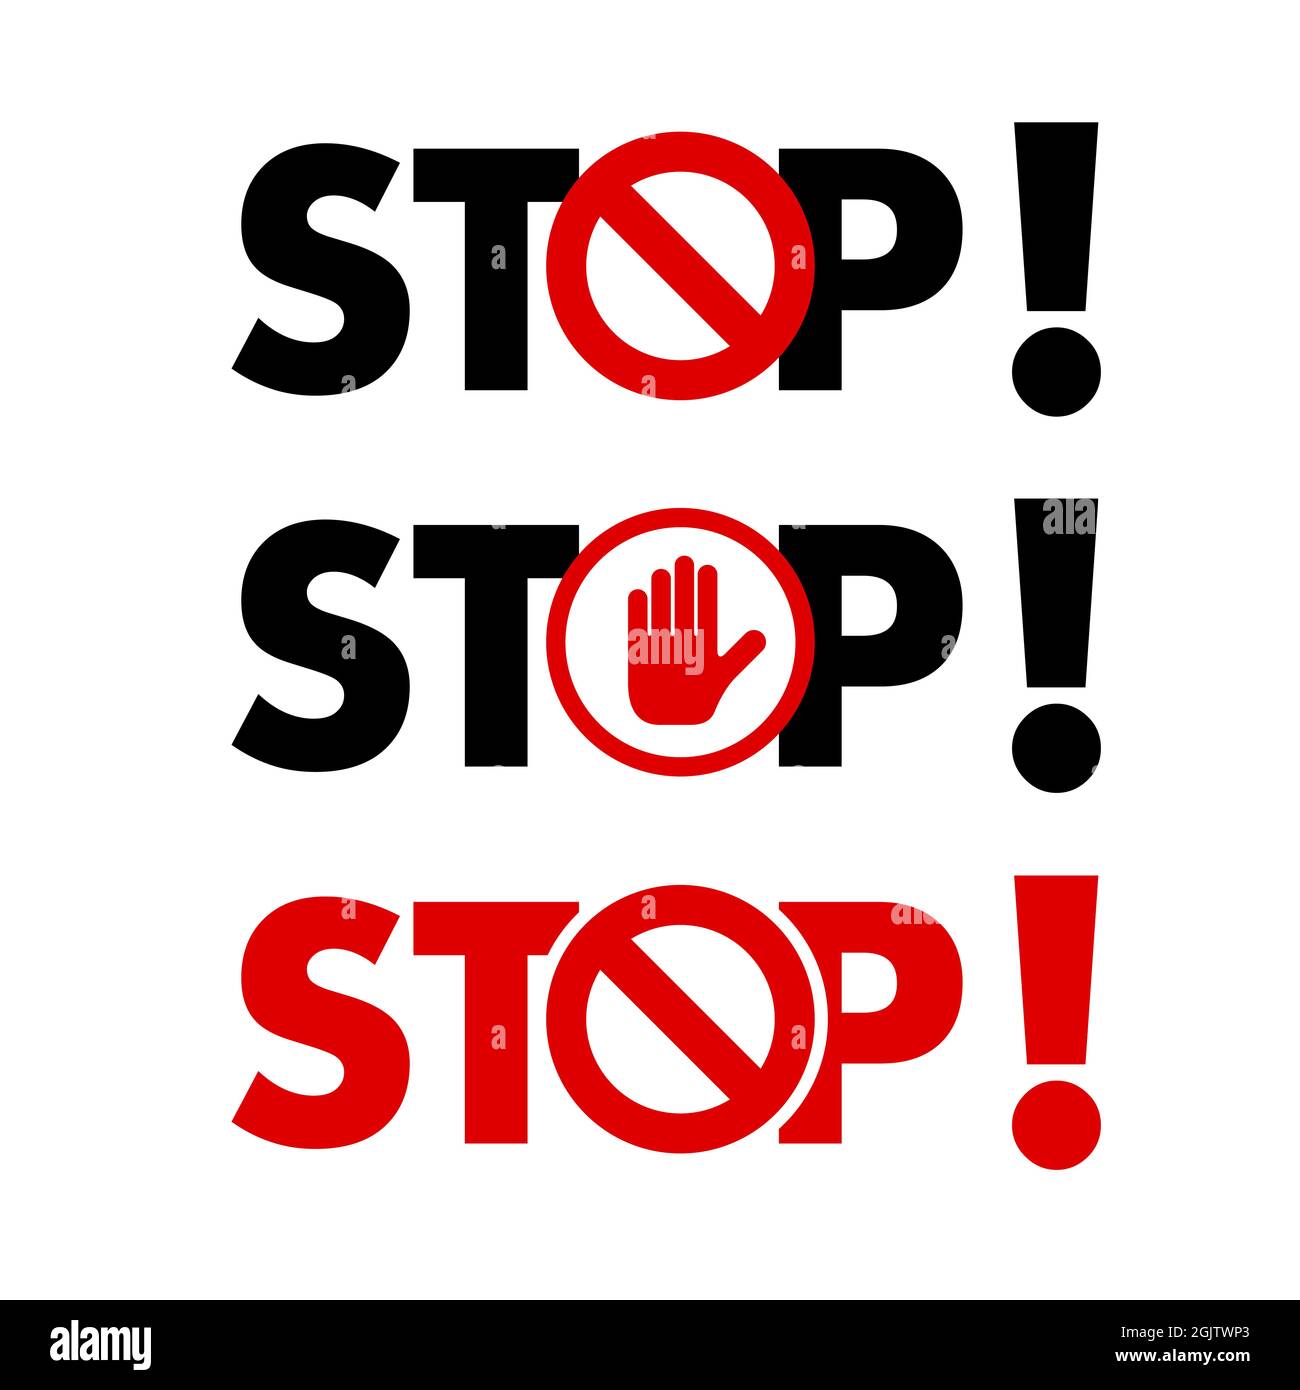 Bold STOP lettering with exclamation mark, stop hand and backslash sign. Protest, stop word design. illustration. Stock Photo